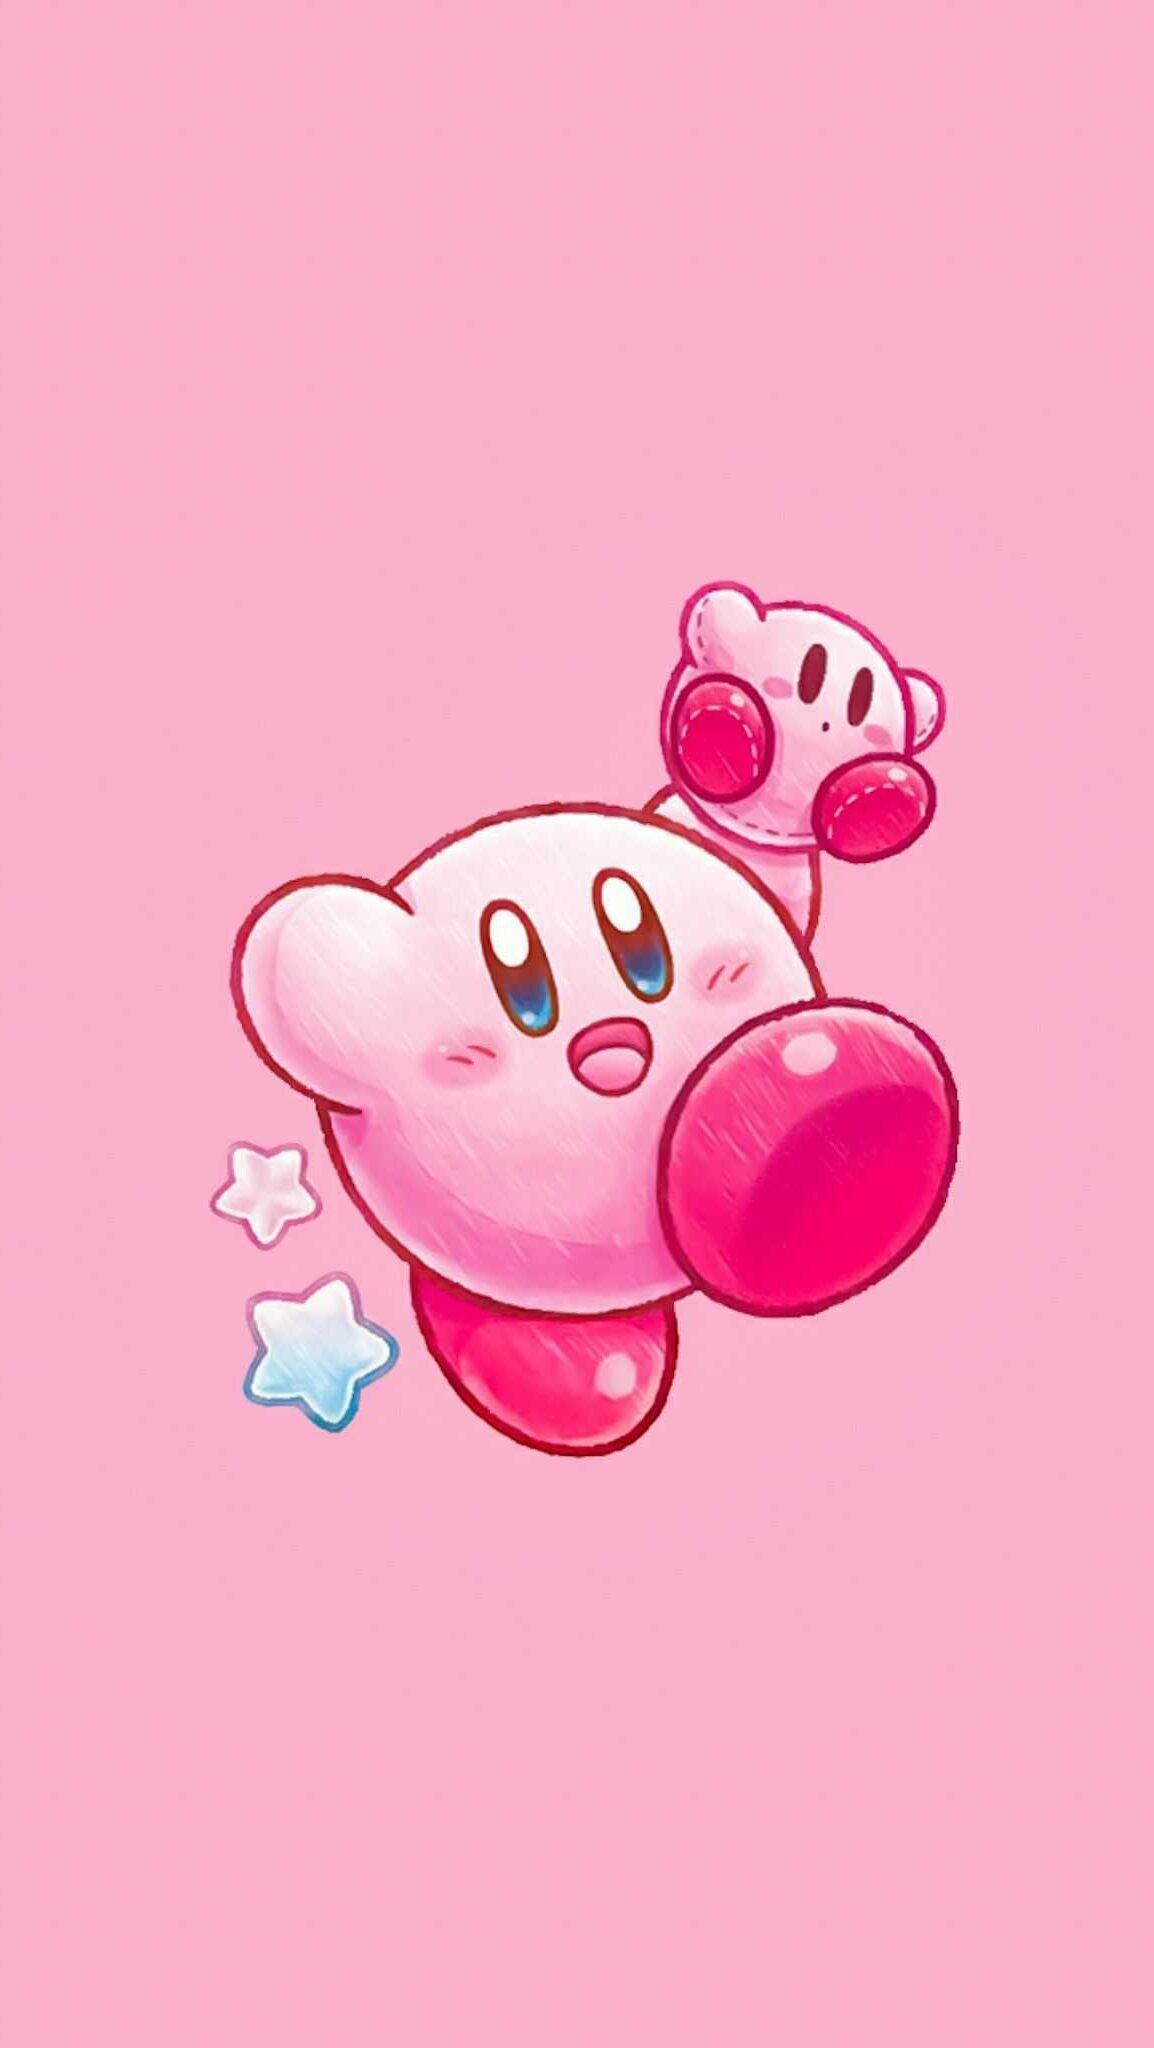 Background Kirby Wallpaper Discover more Action, Cute, Developed, Game Series, Kirby wallpaper. /back. Hero wallpaper, Wallpaper, Kirby